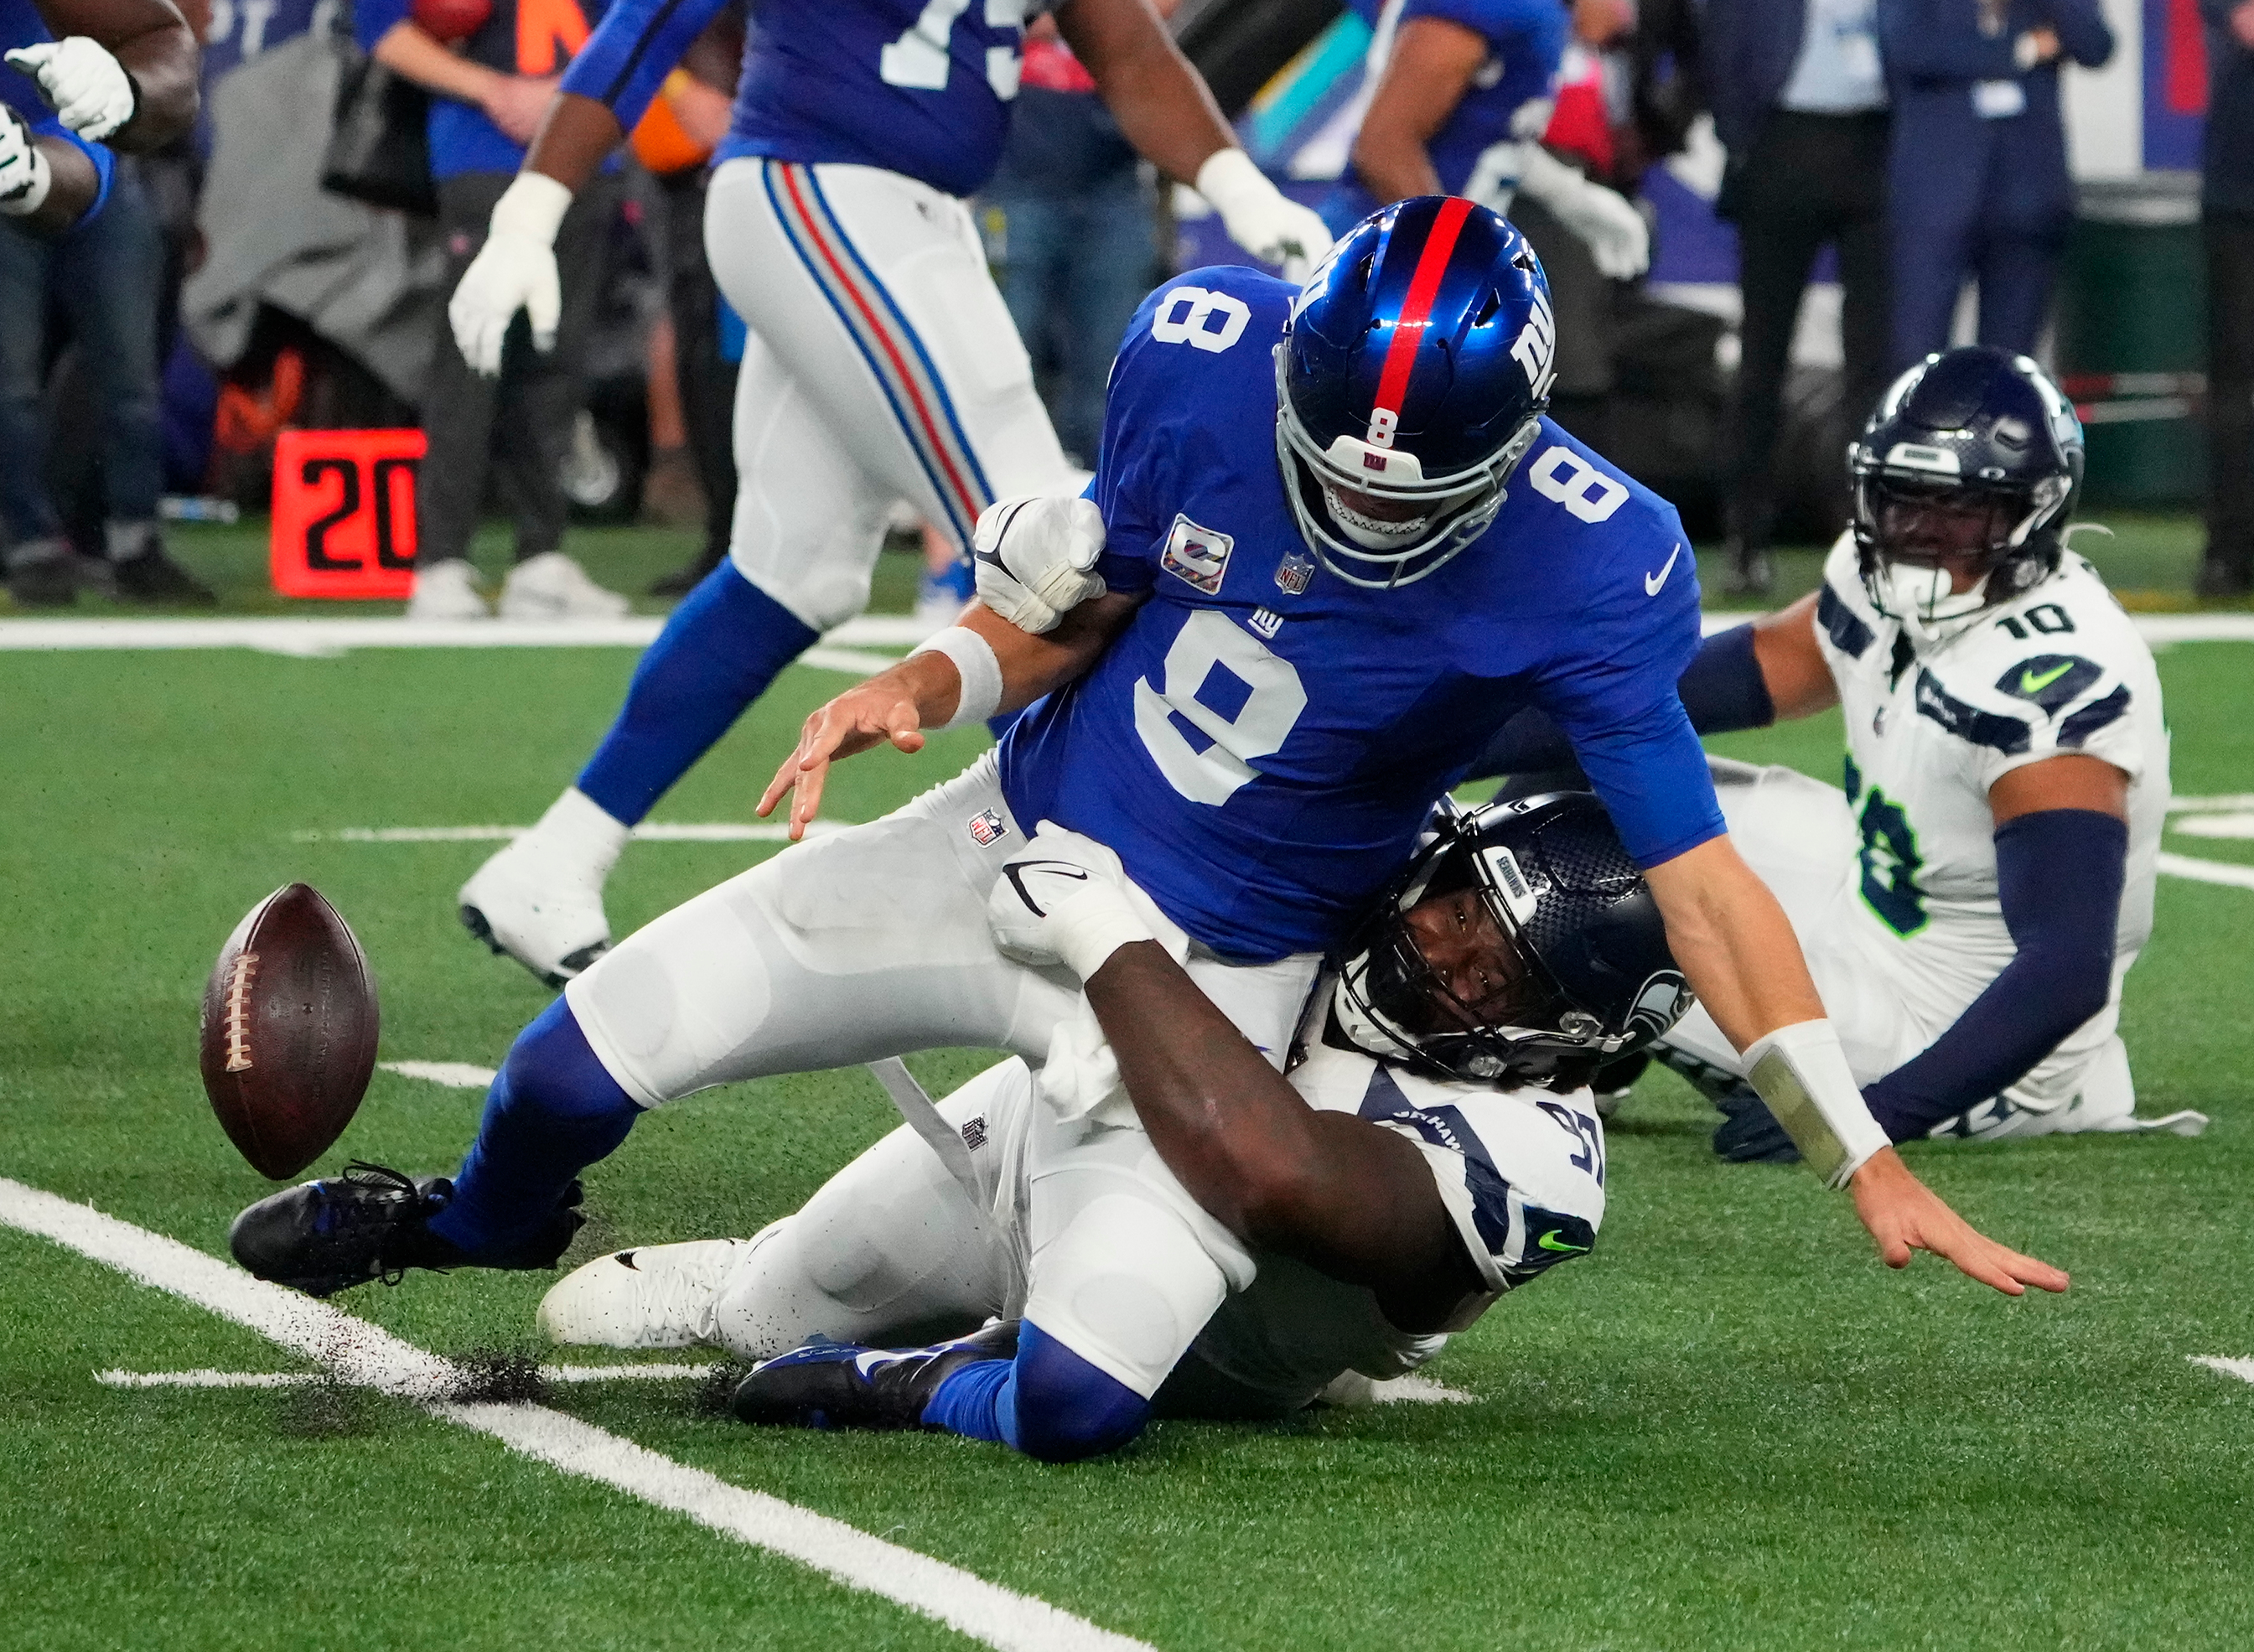 Seahawks defensive end Mario Edwards Jr. (97) strips the ball from New York Giants quarterback Daniel Jones (8) and the Seahawks recovered at MetLife Stadium.